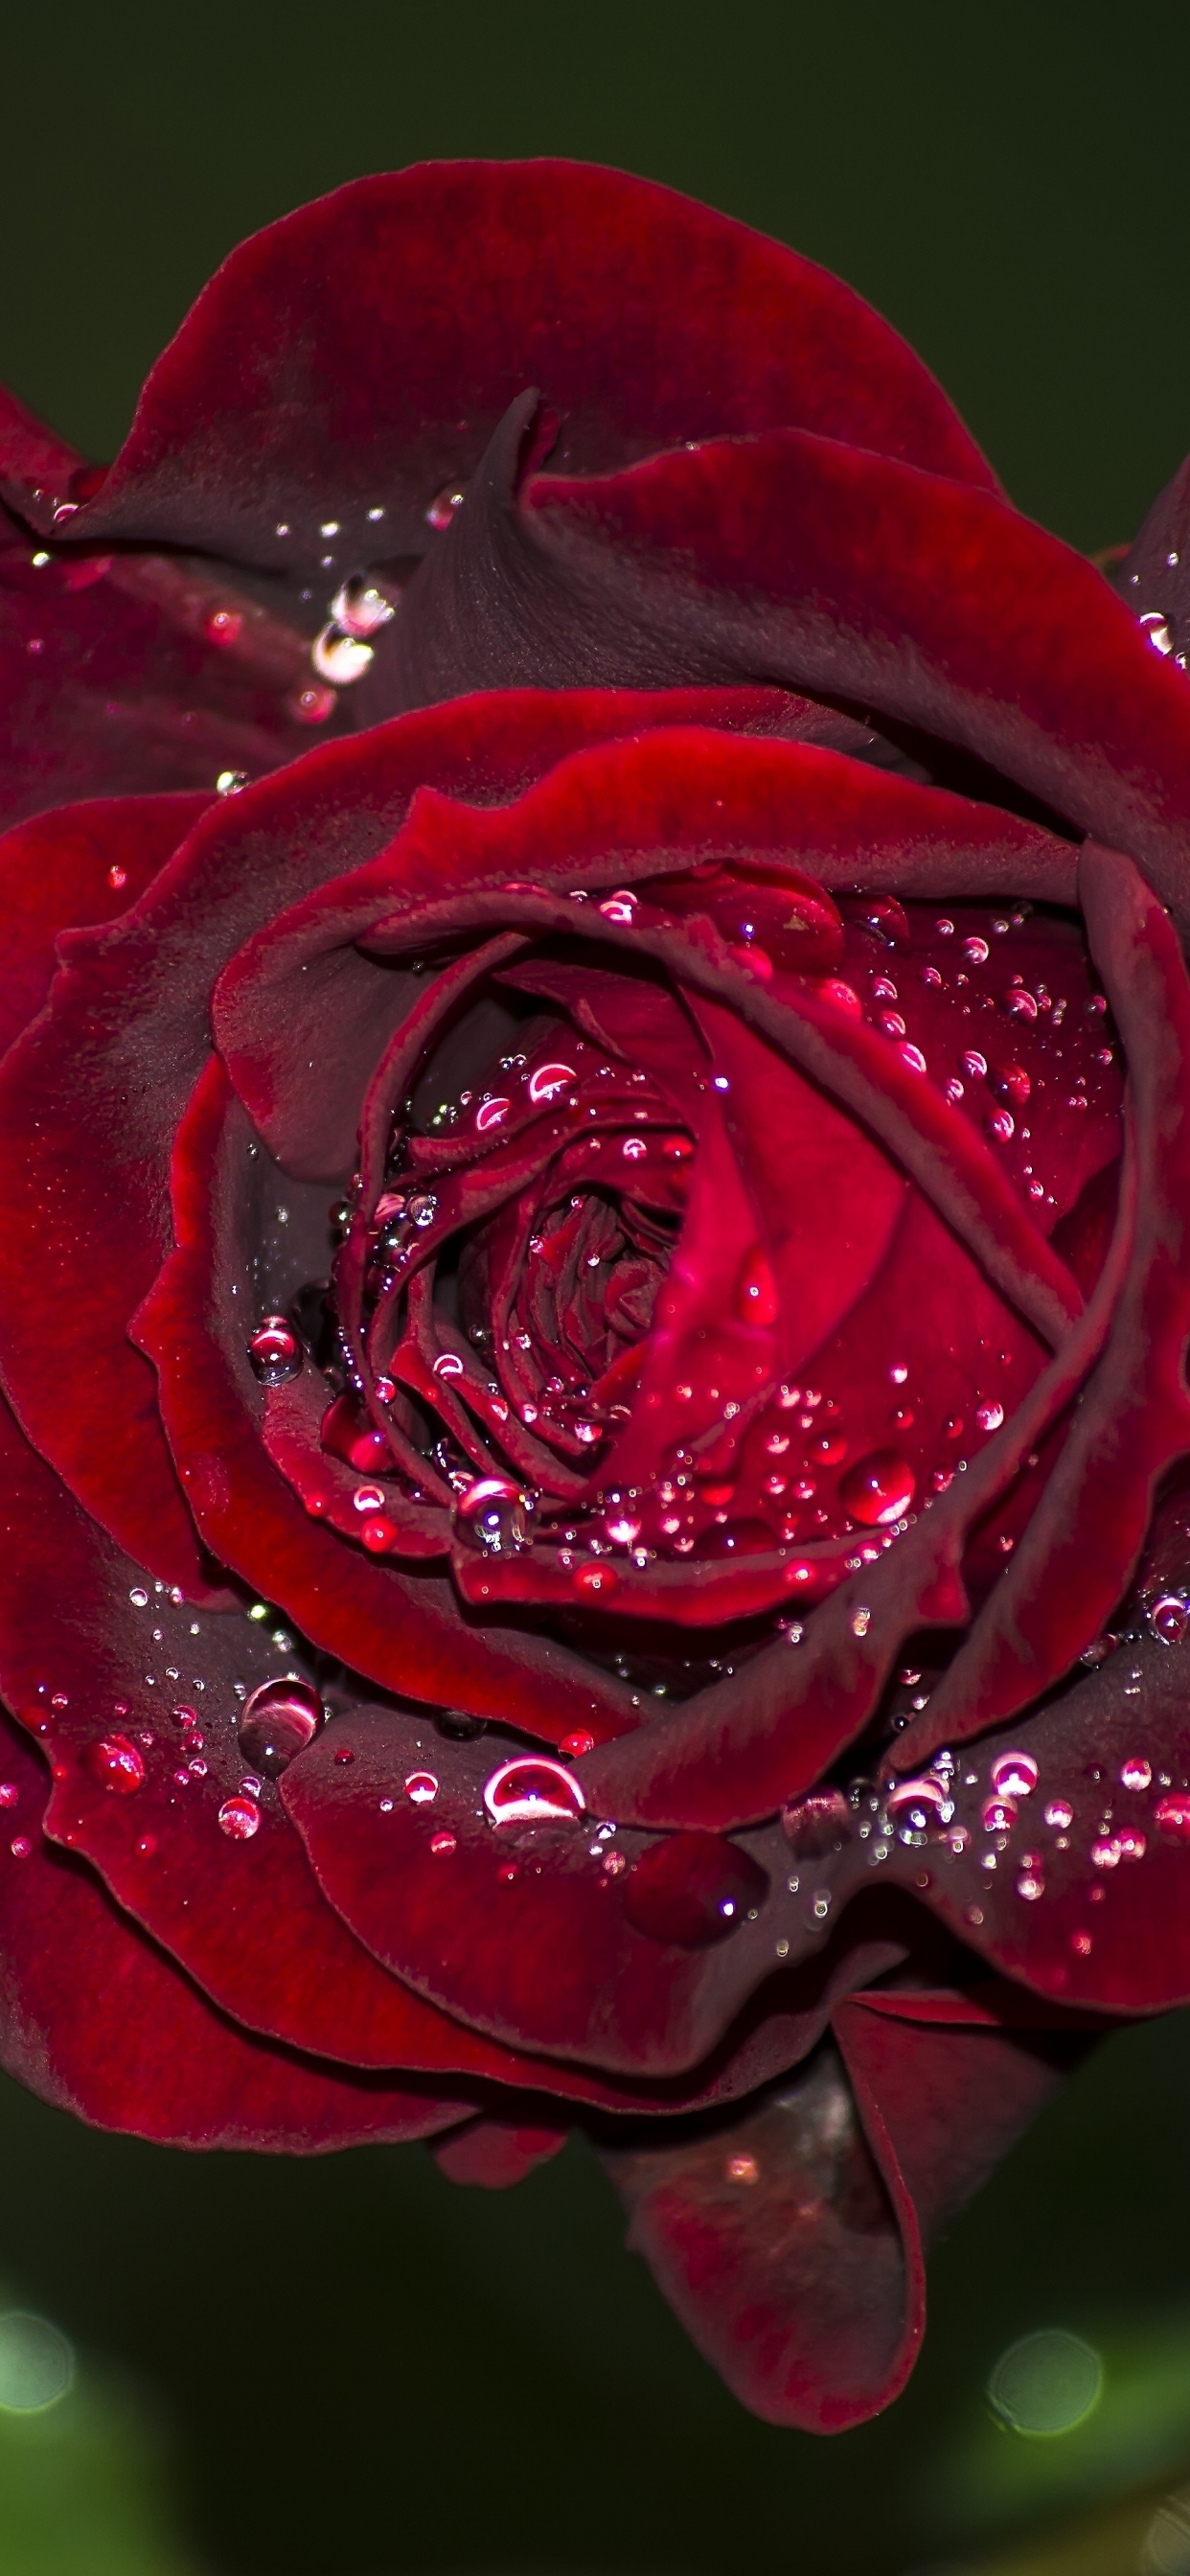 Red Rose in Bloom With Dew Drops. Wallpaper in 1242x2688 Resolution